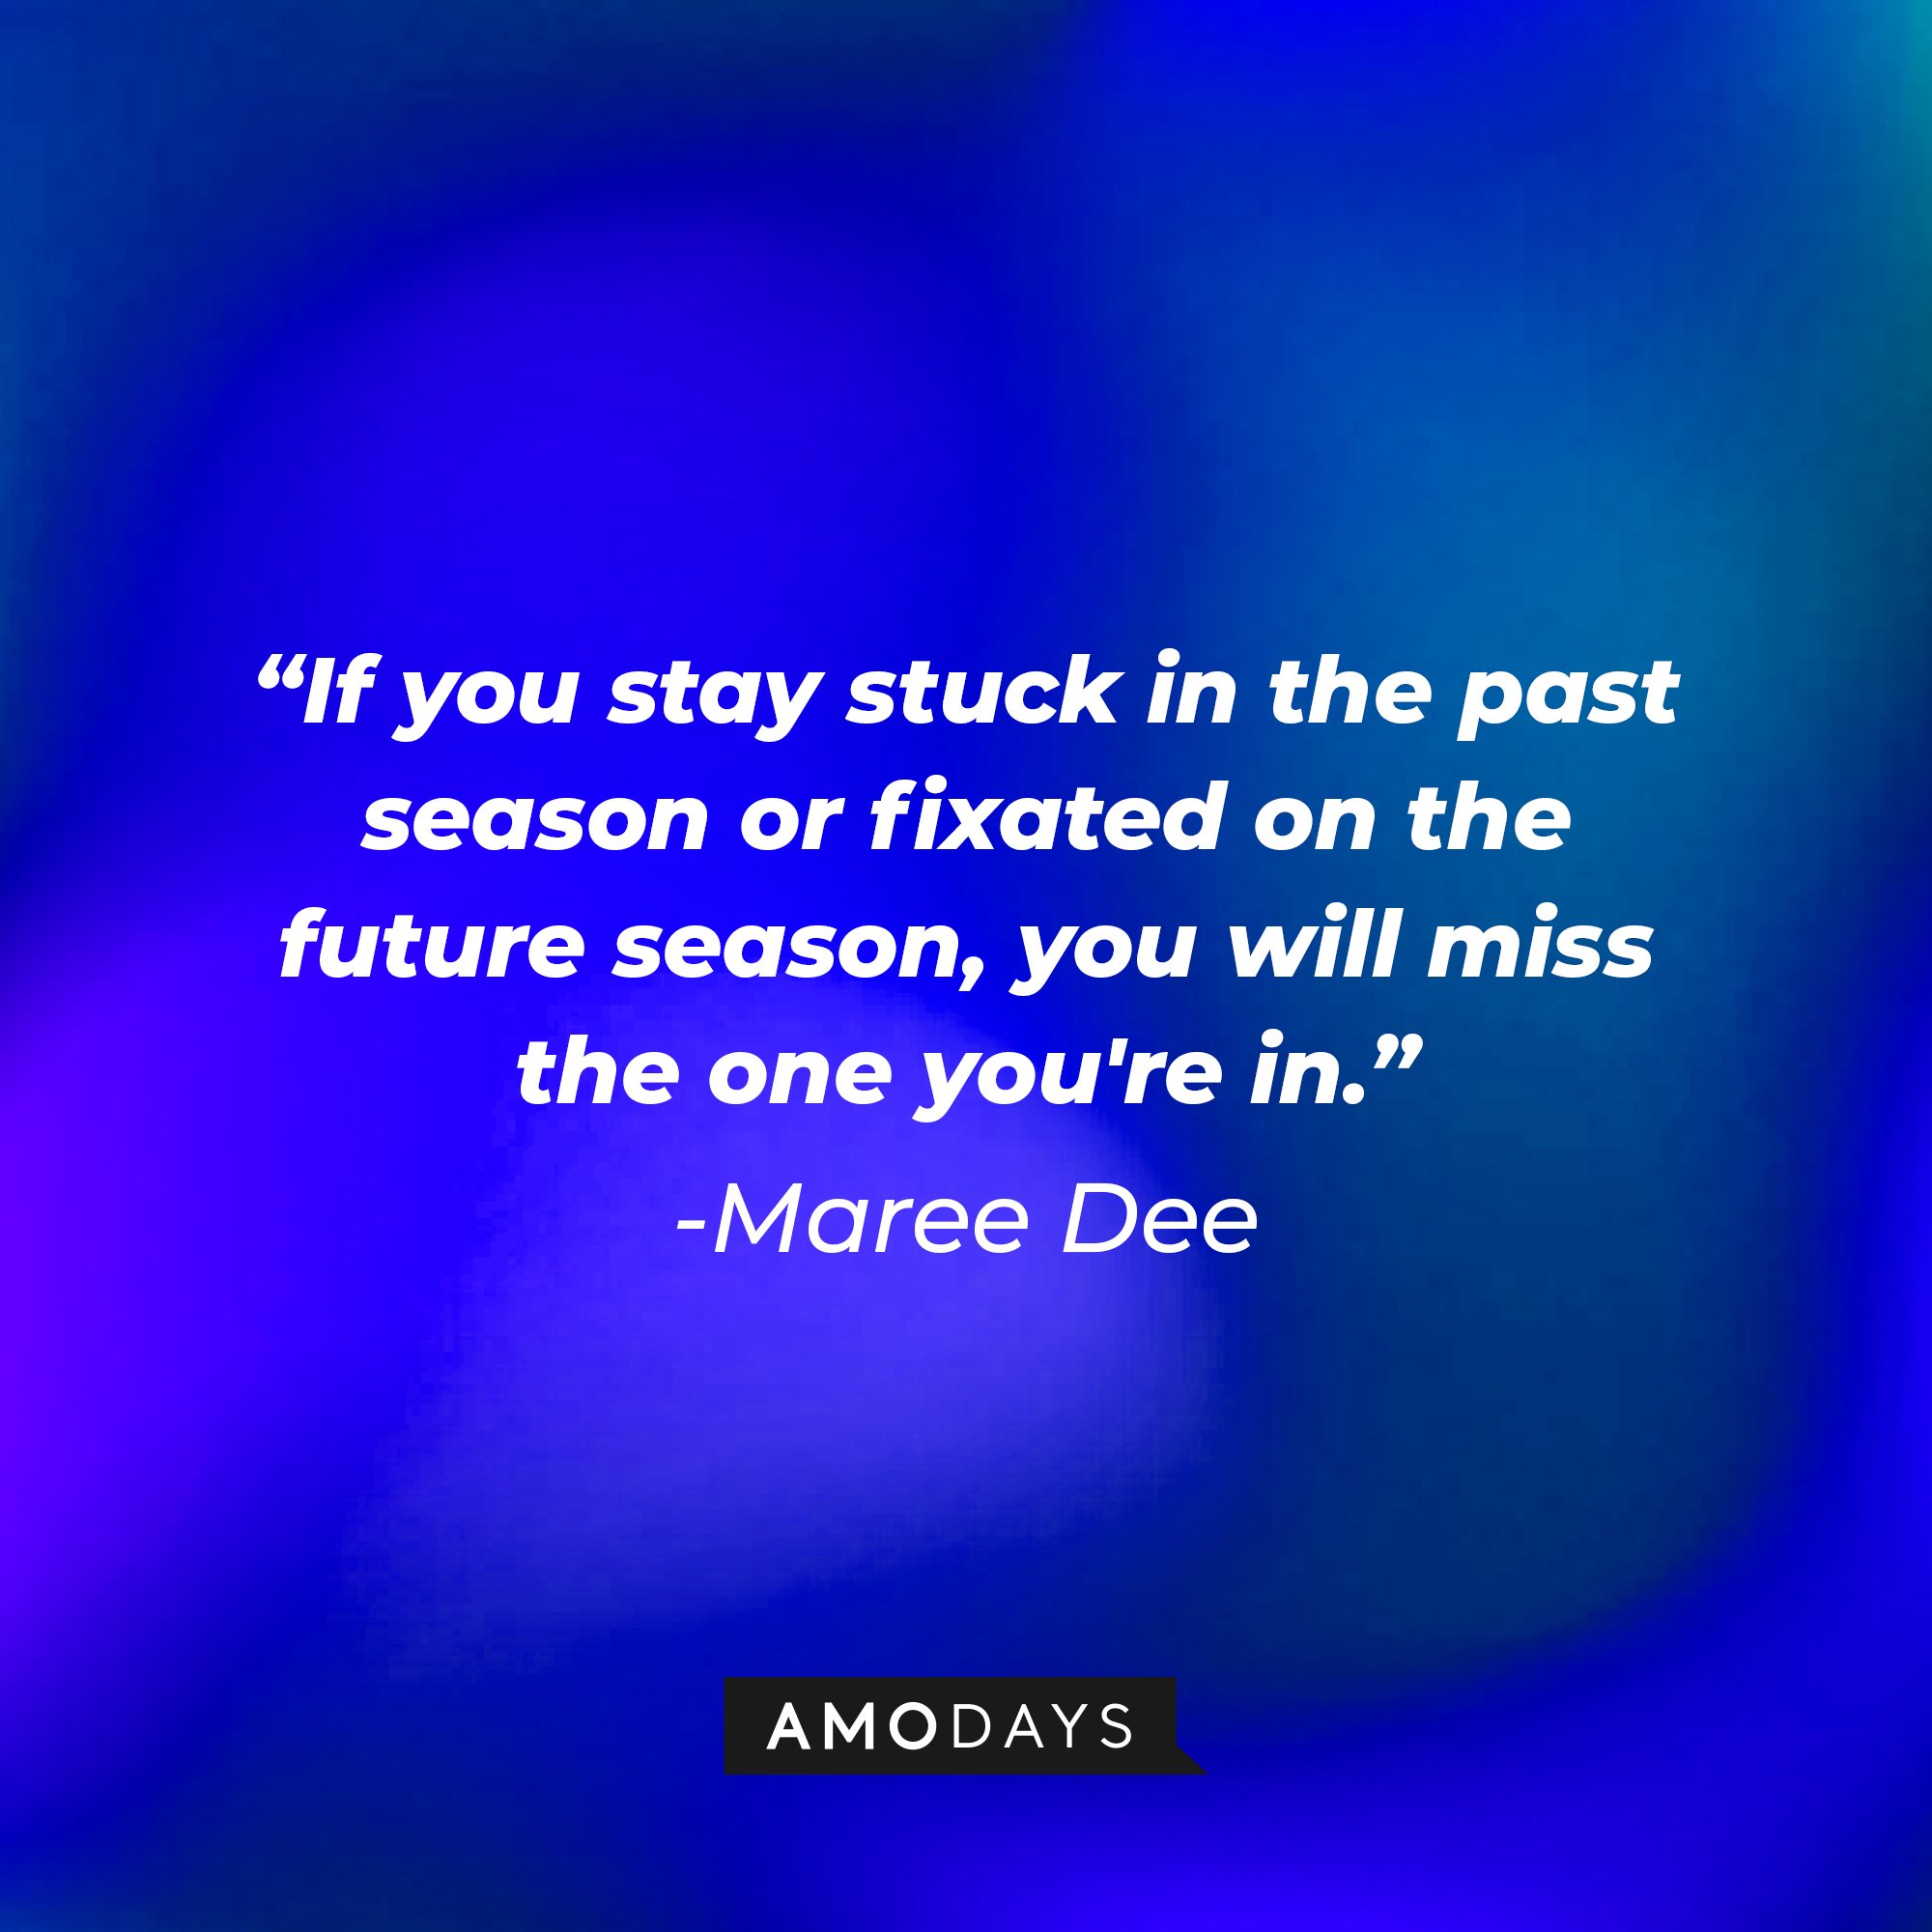 Maree Dee’s quote: "If you stay stuck in the past season or fixated on the future season, you will miss the one you're in." | Image: AmoDays